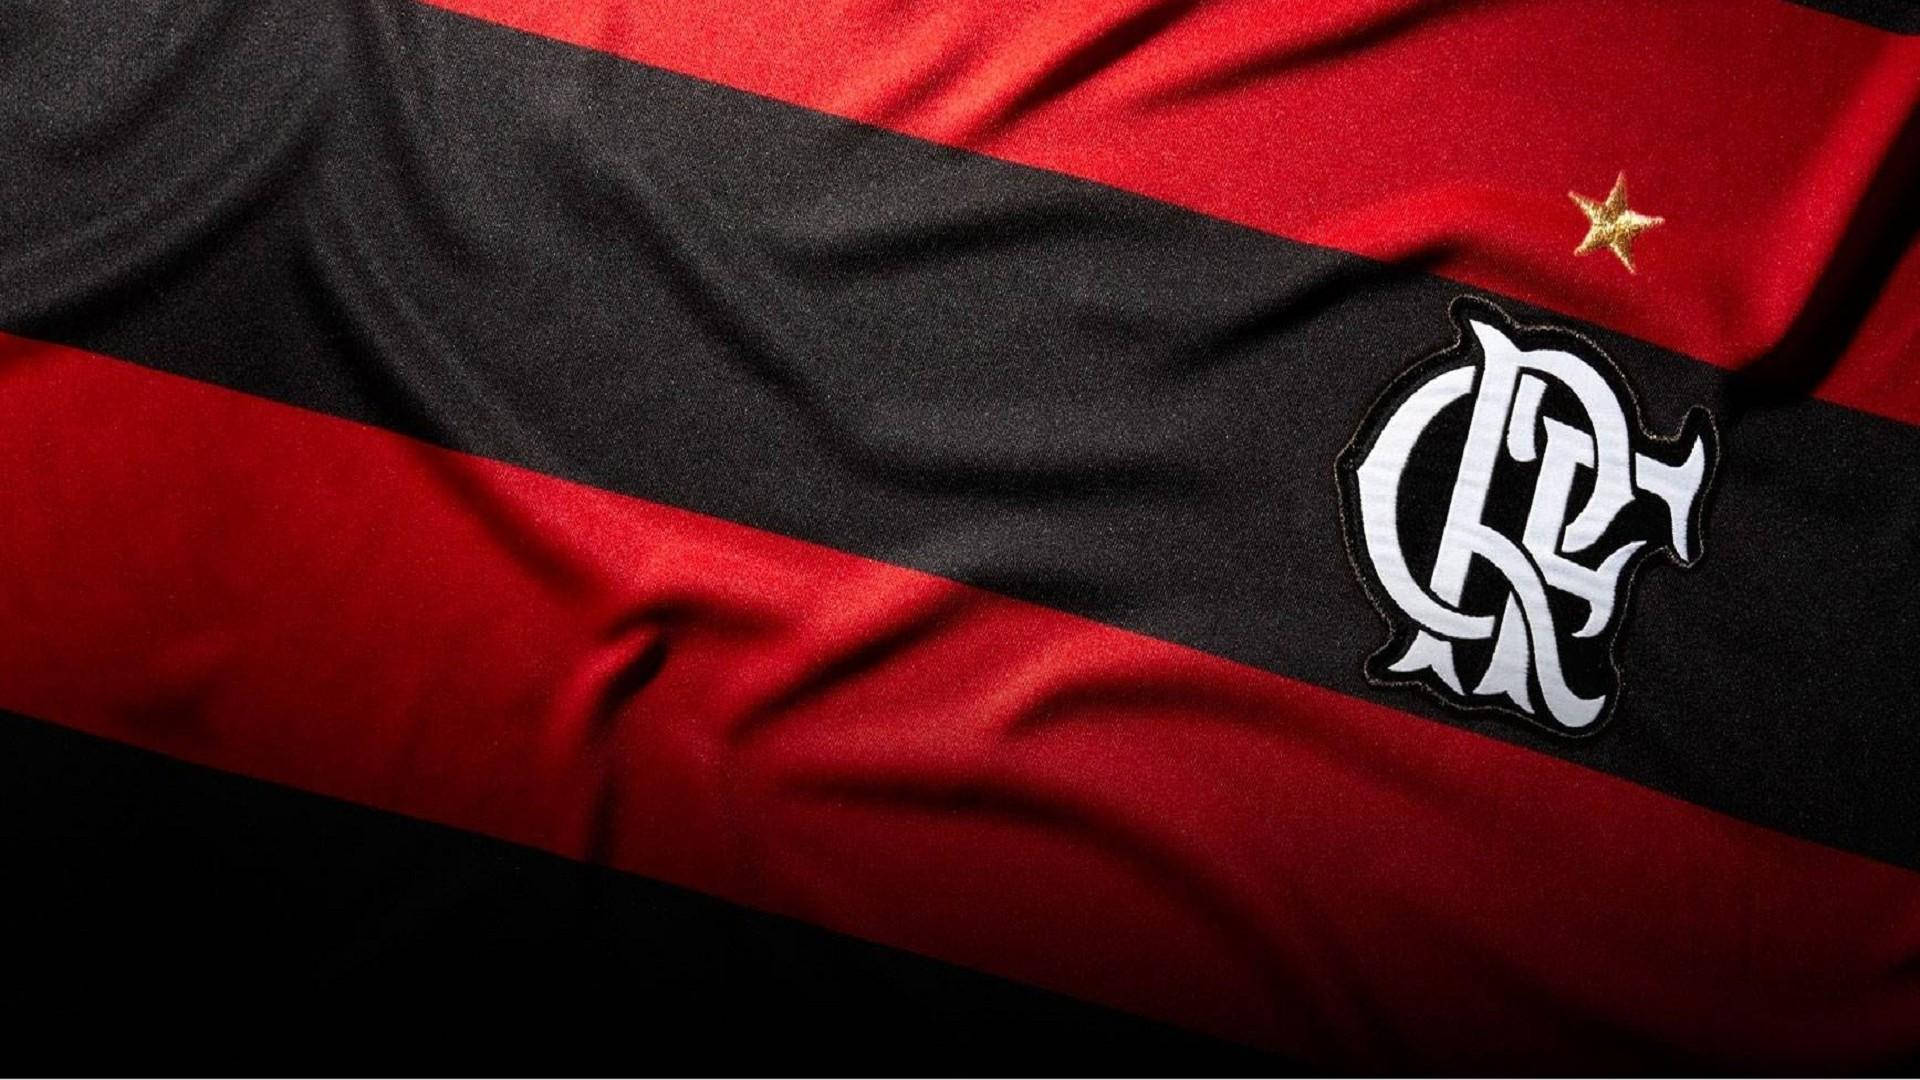 Flamengo Fc Pride - A Creased Flag Displaying Passion